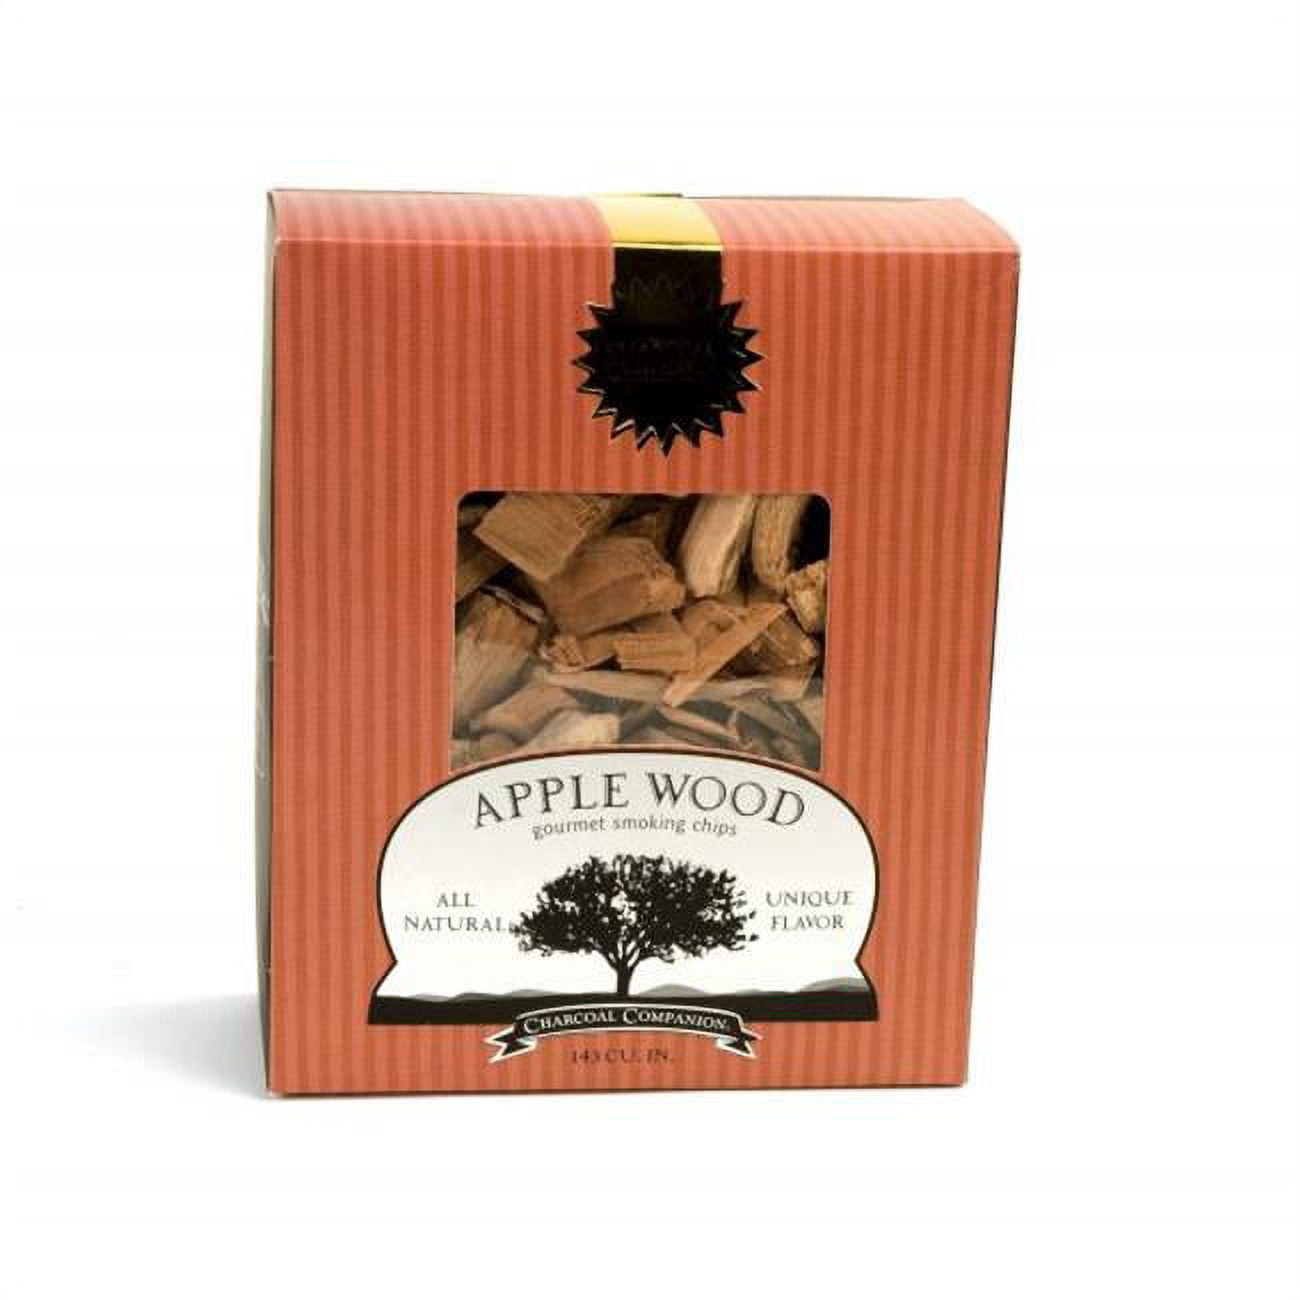 Picture of Charcoal Companion CC6002 144 cu in. Apple Wood Gourmet Smoking Chips